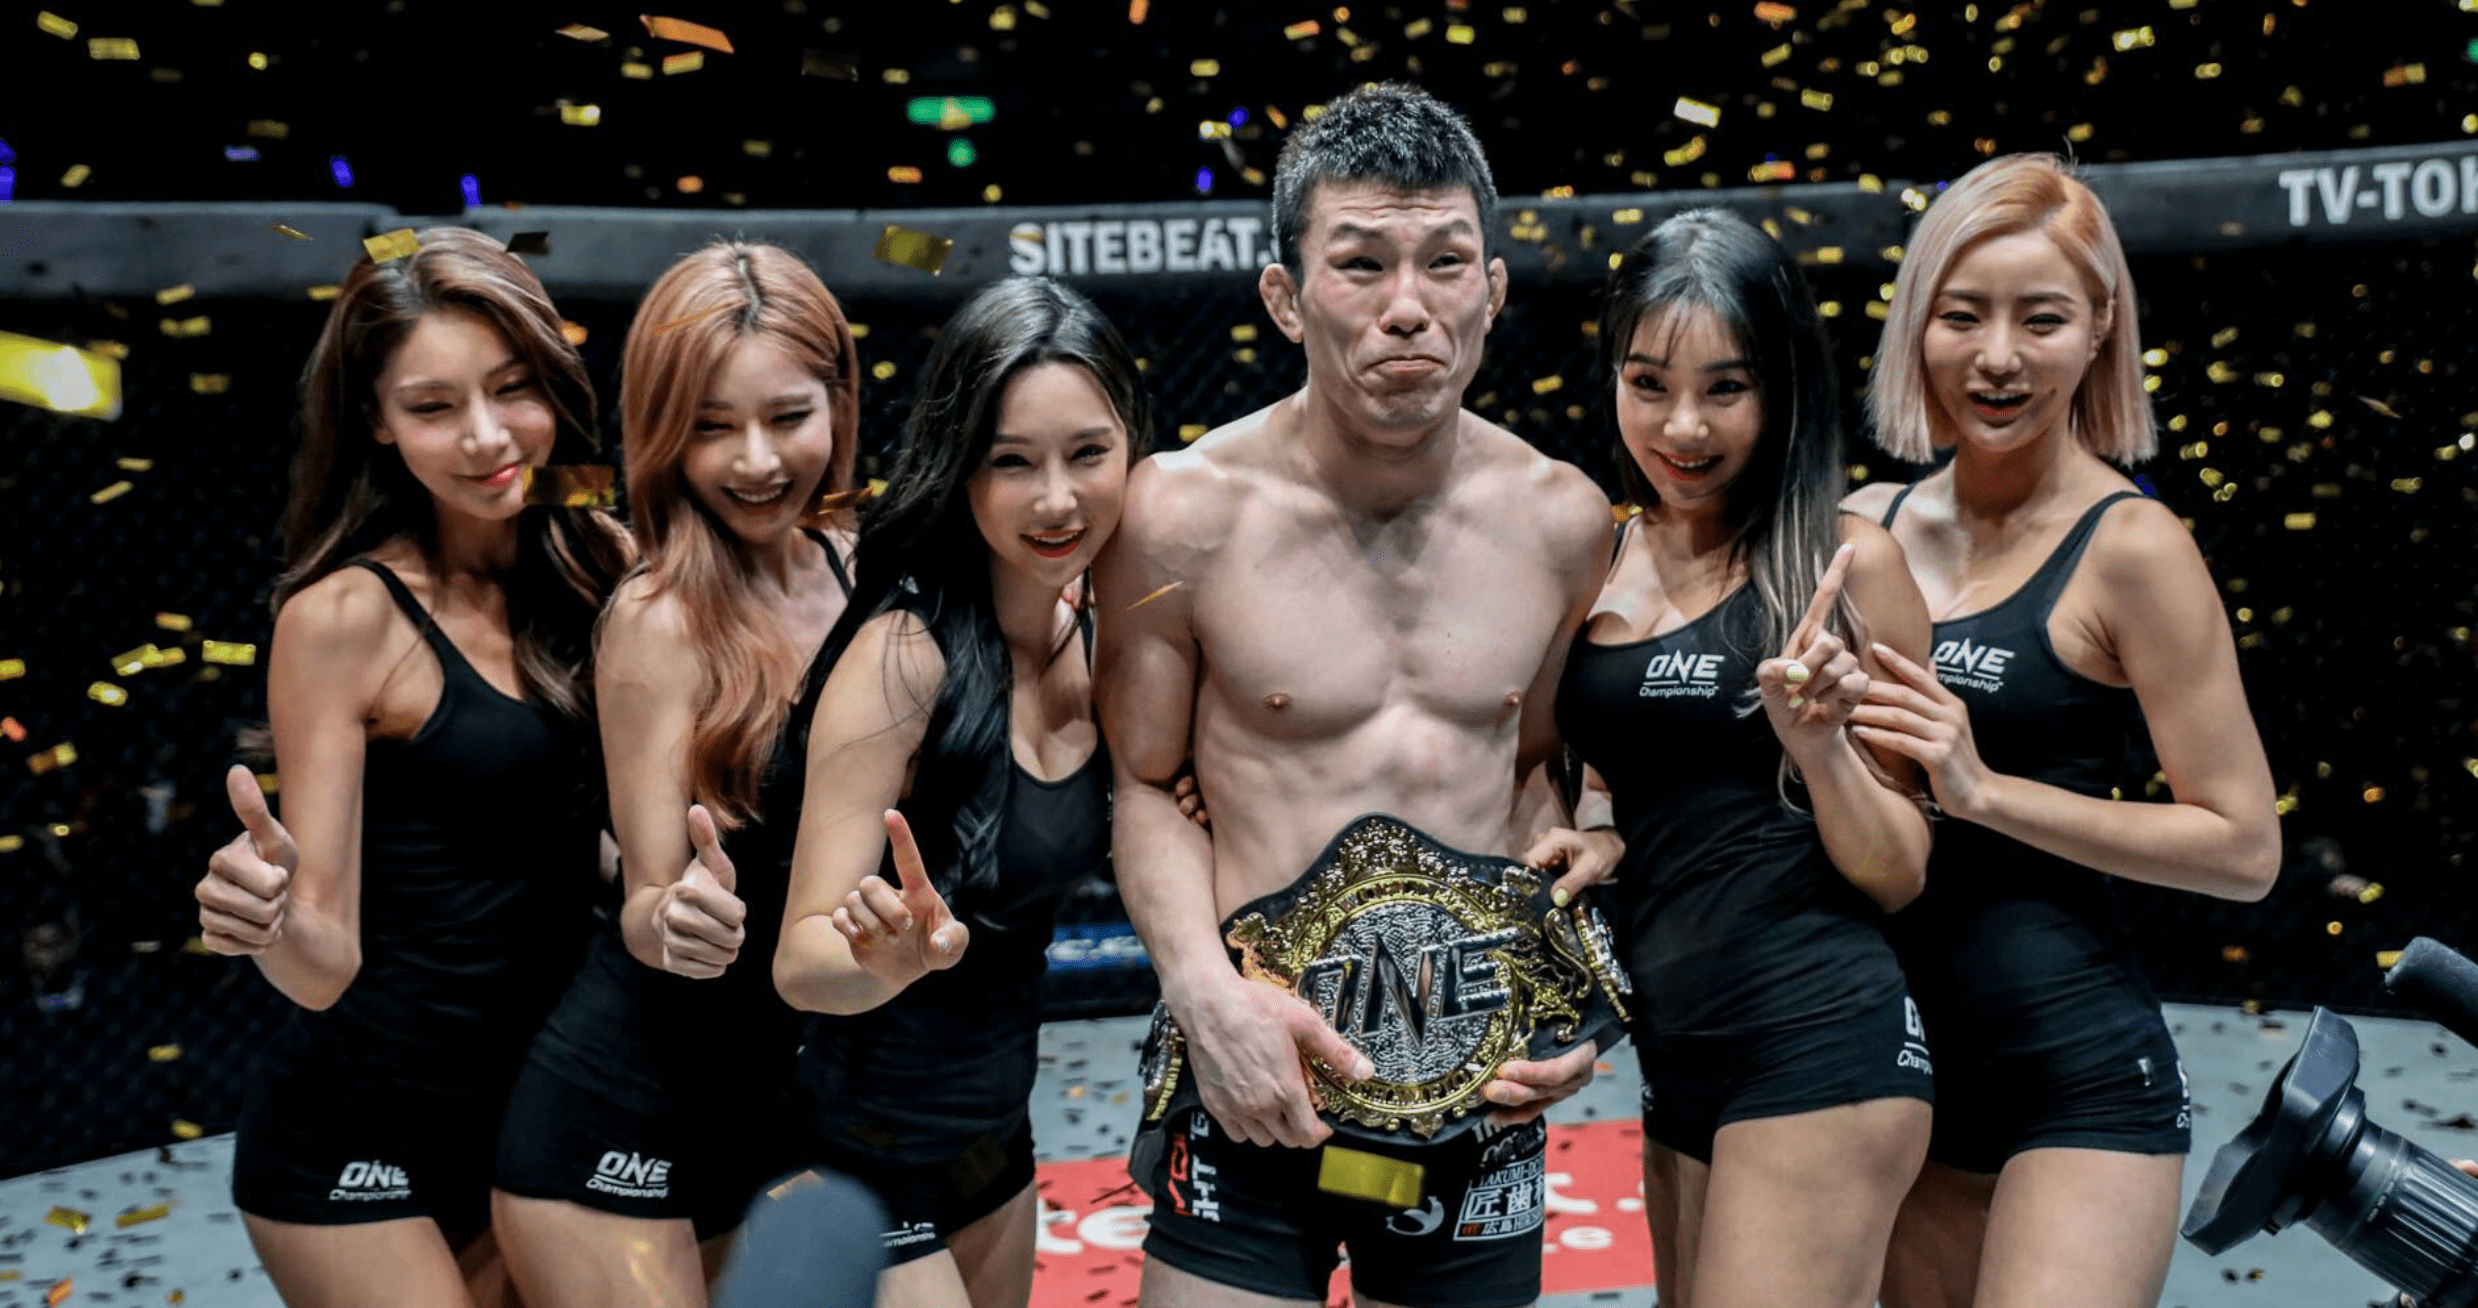 Shinya Aoki To Defend Lightweight Title Against Christian Lee